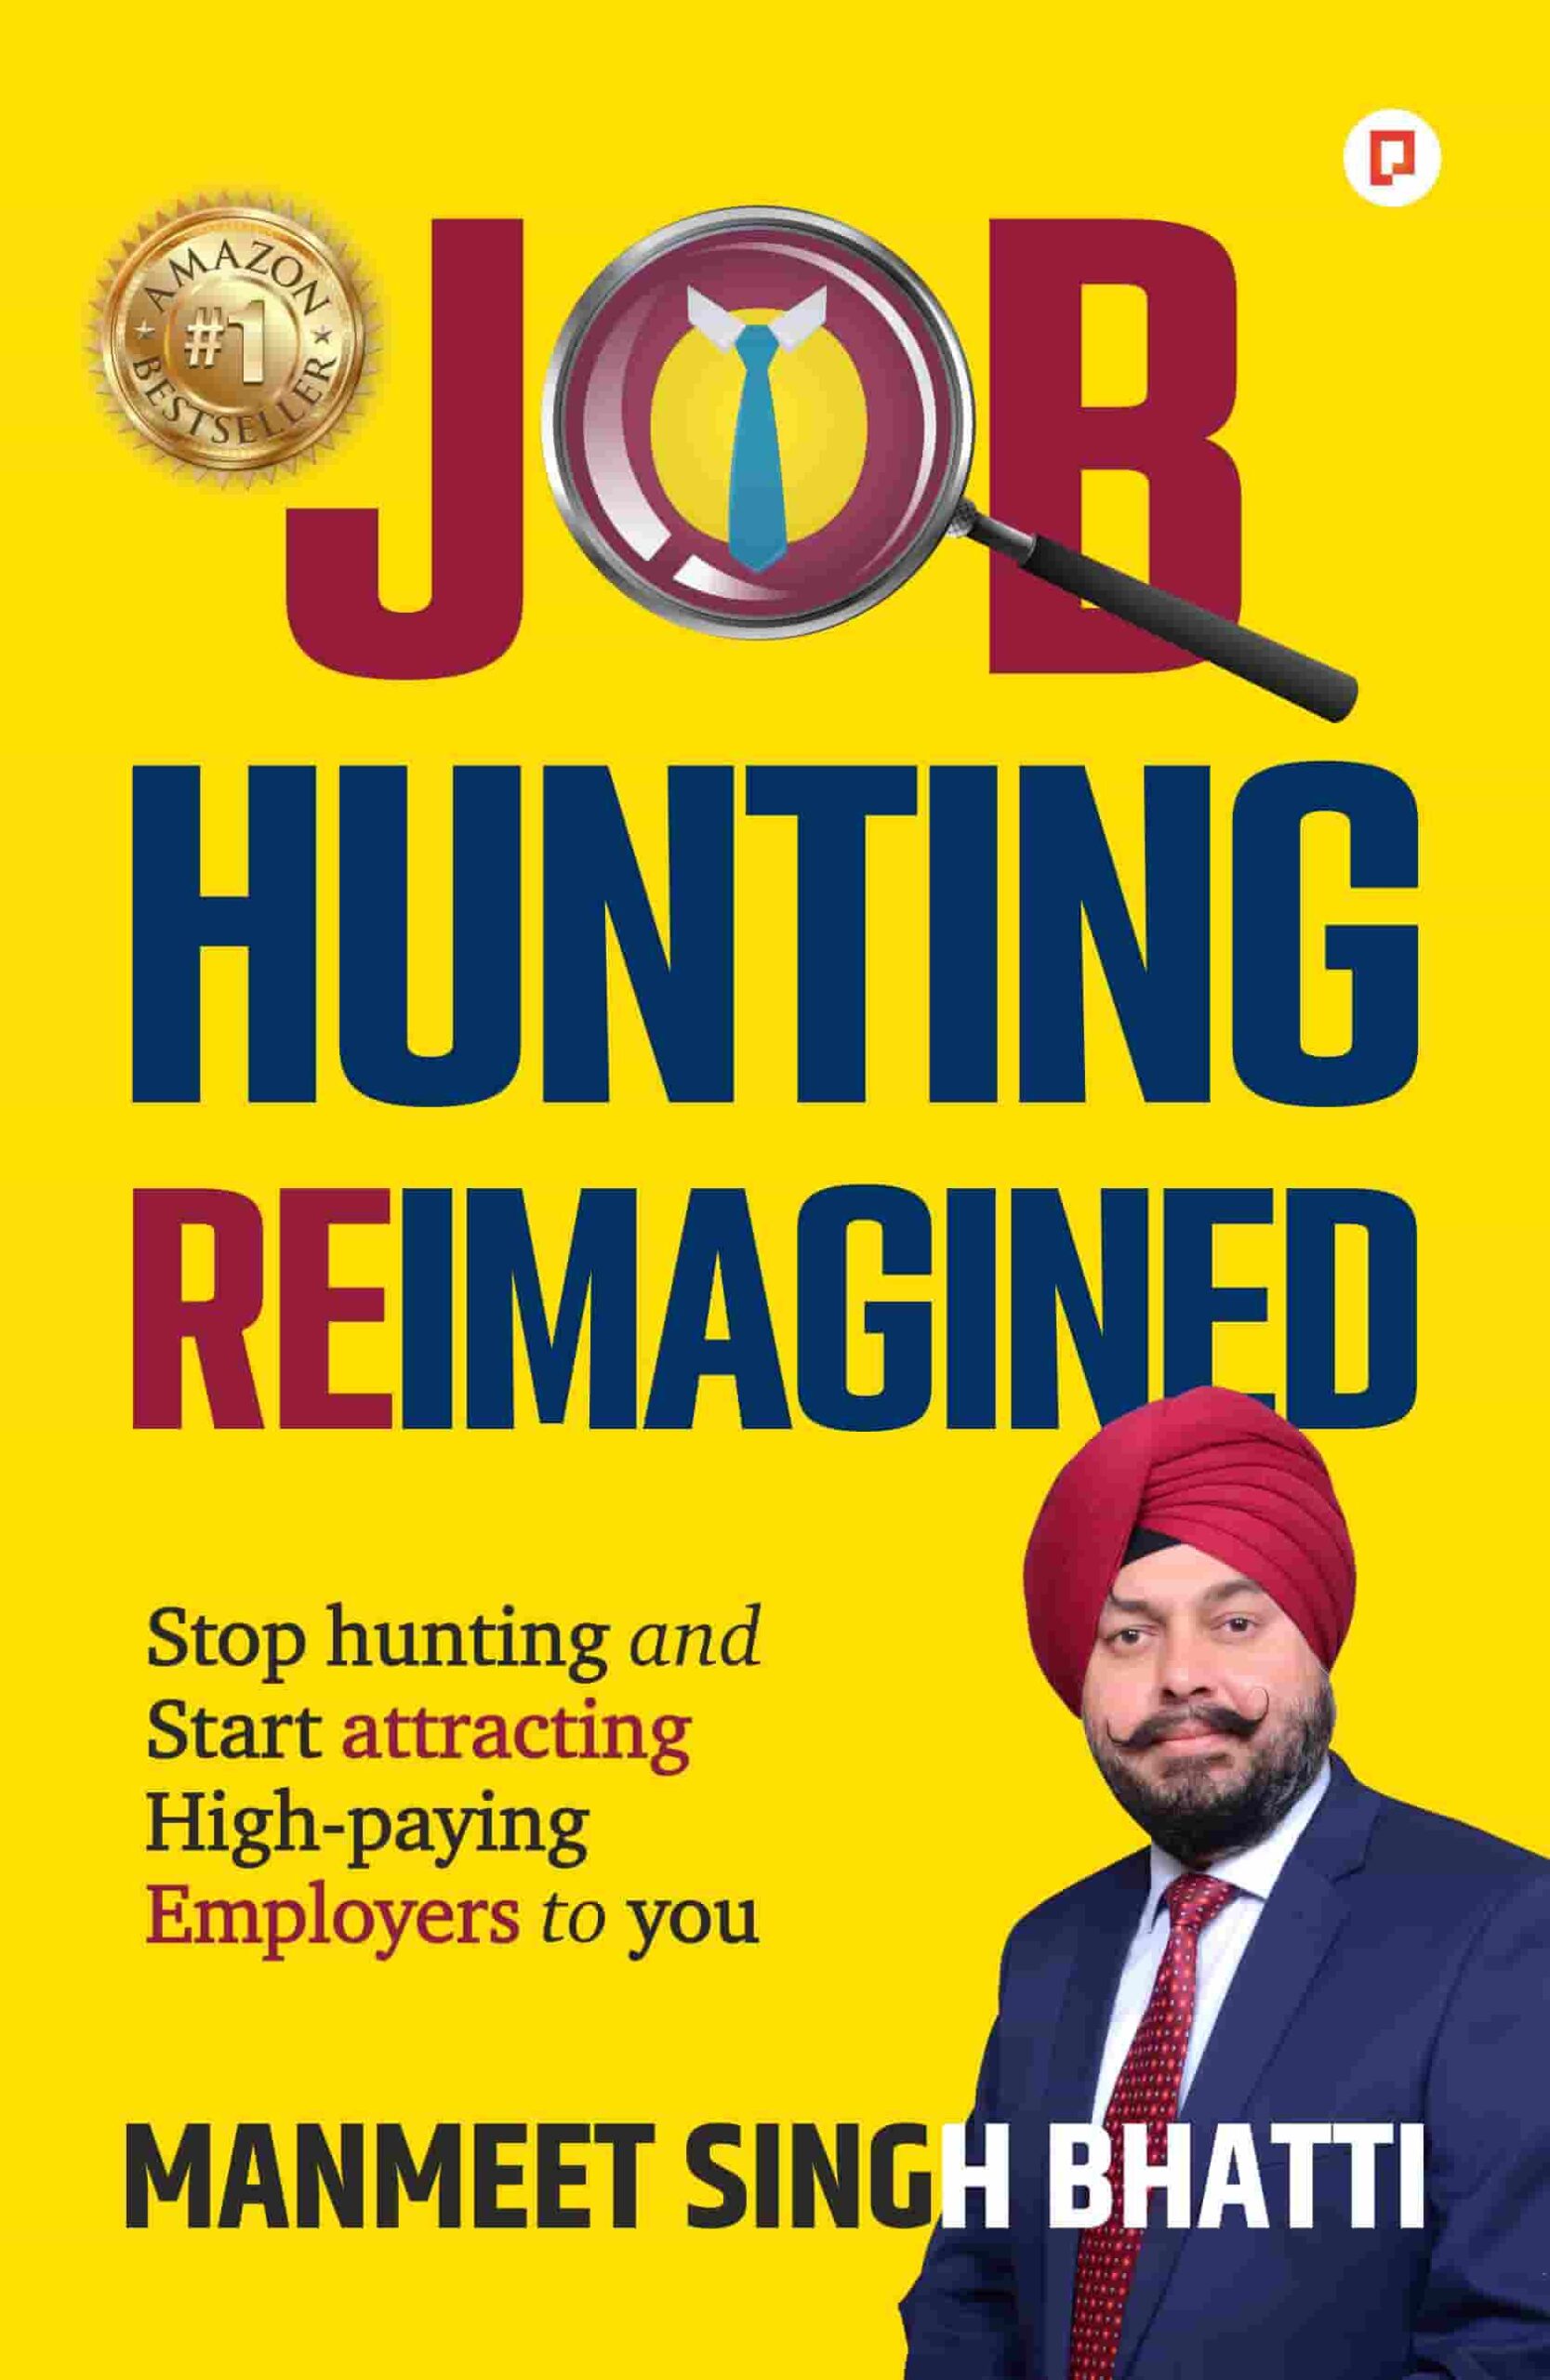 Job Hunting REIMAGINED by Author Manmeet Singh Bhatti